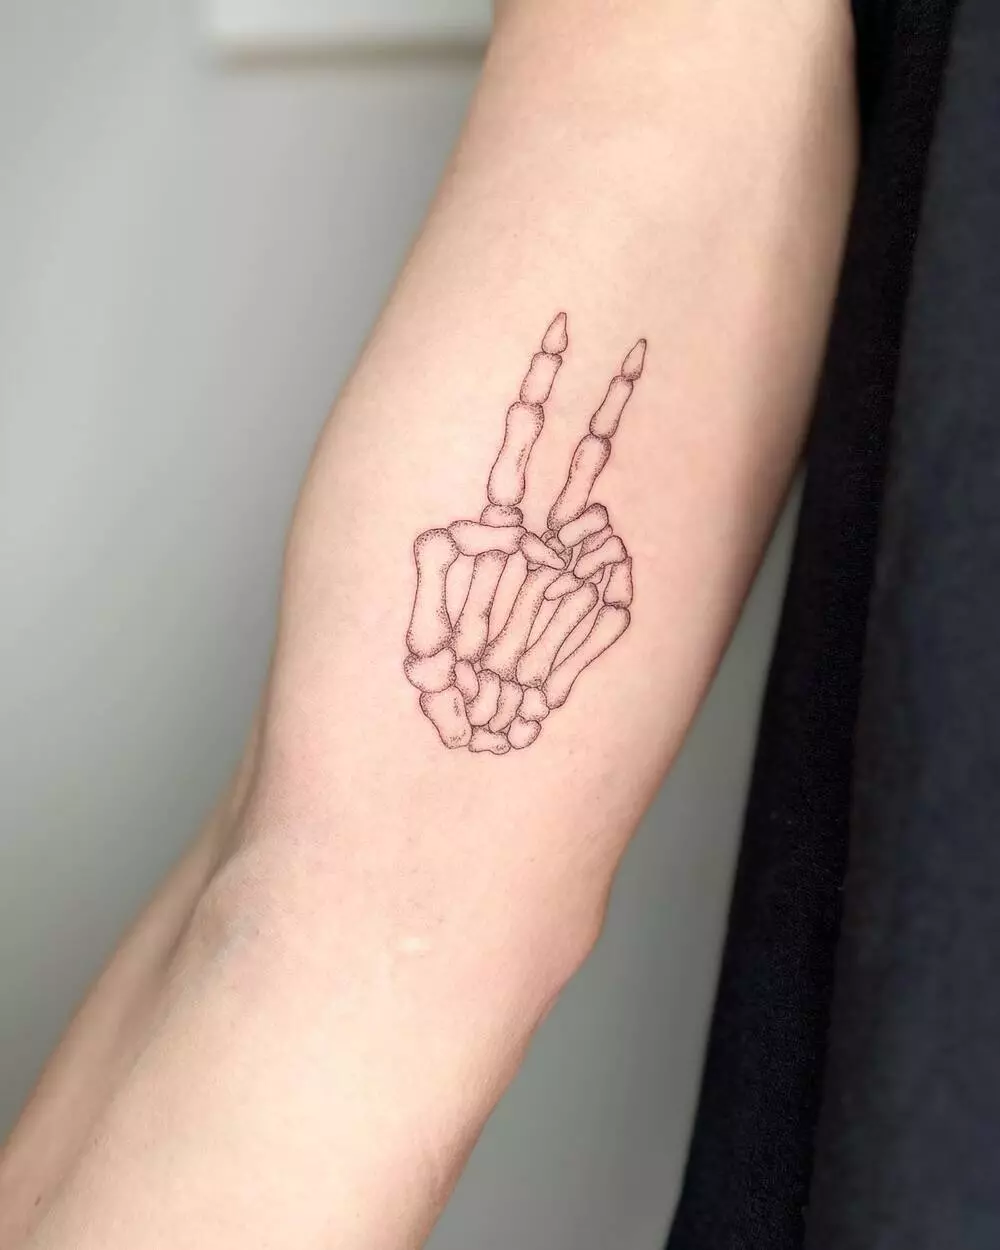 A Close-up Image of Skeleton Hand Showing Peace Sign Tattoo